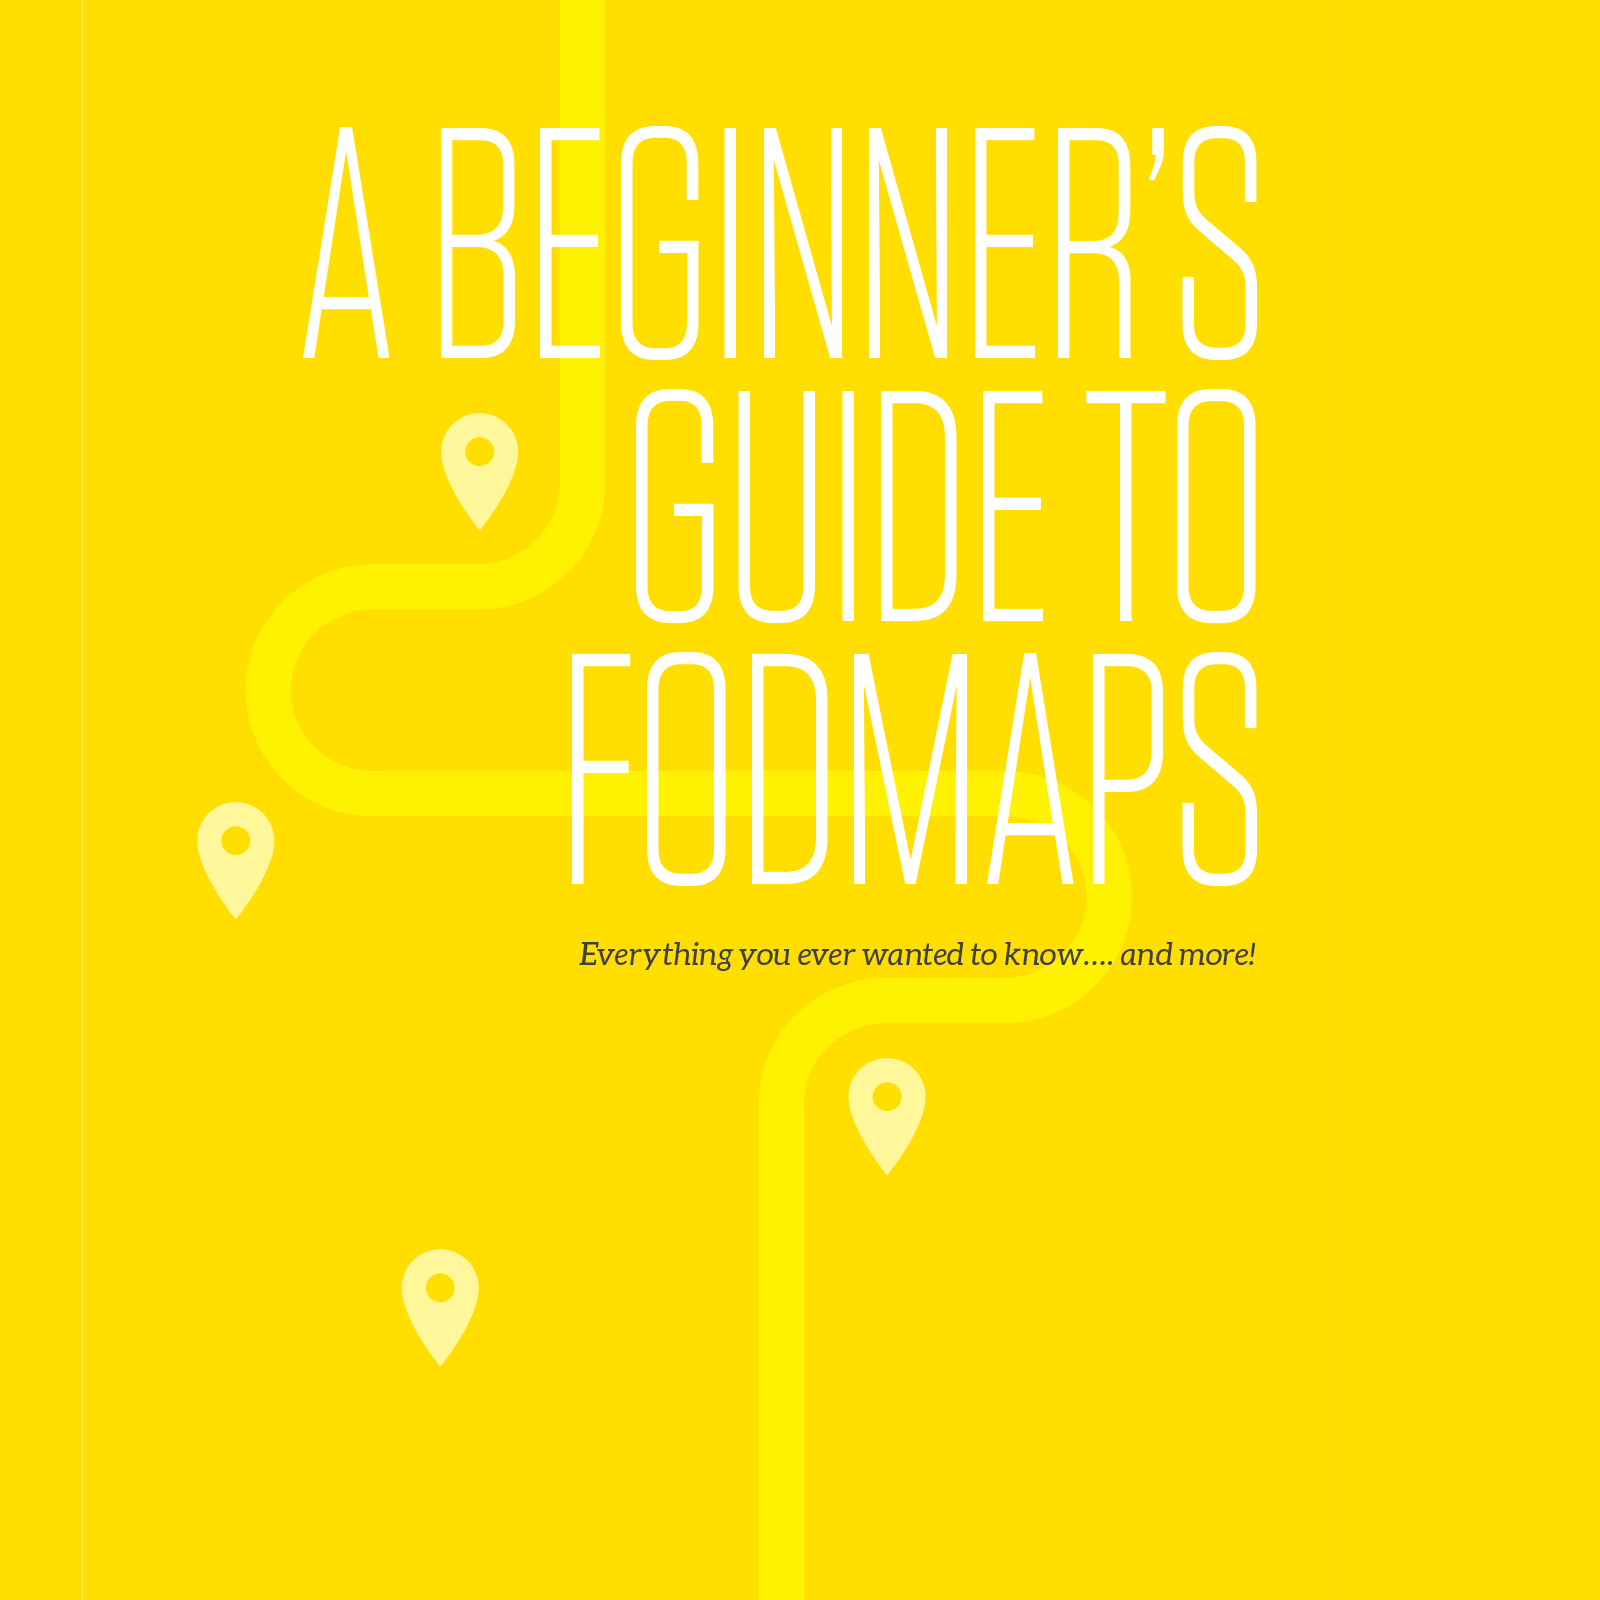 The words ' a beginner's guide to FODMAPs" is written in white text over a yellow background. Behind the text is a bright yellow line representing the intestine.